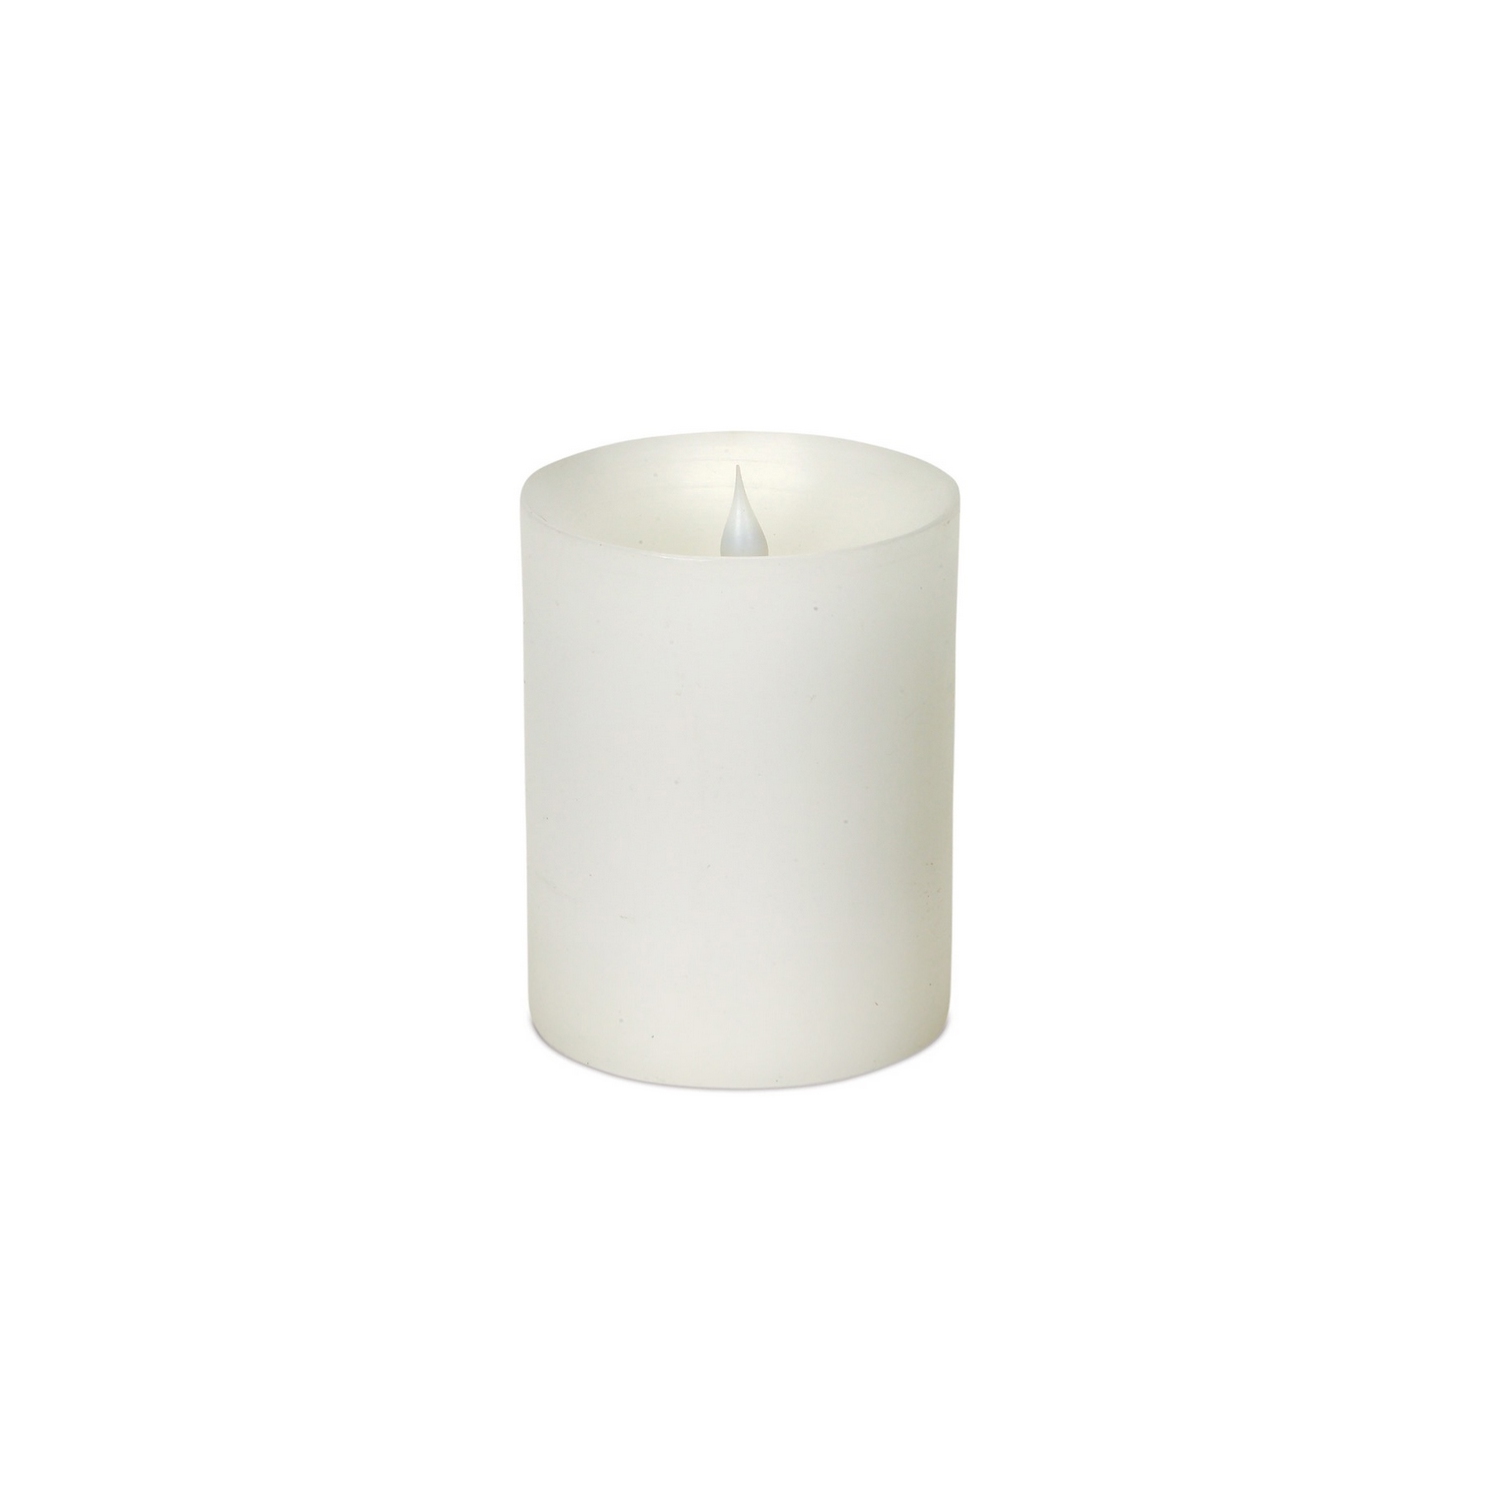 5.25" Battery Operated White Flameless Wax LED Pillar Candle with Moving Flame